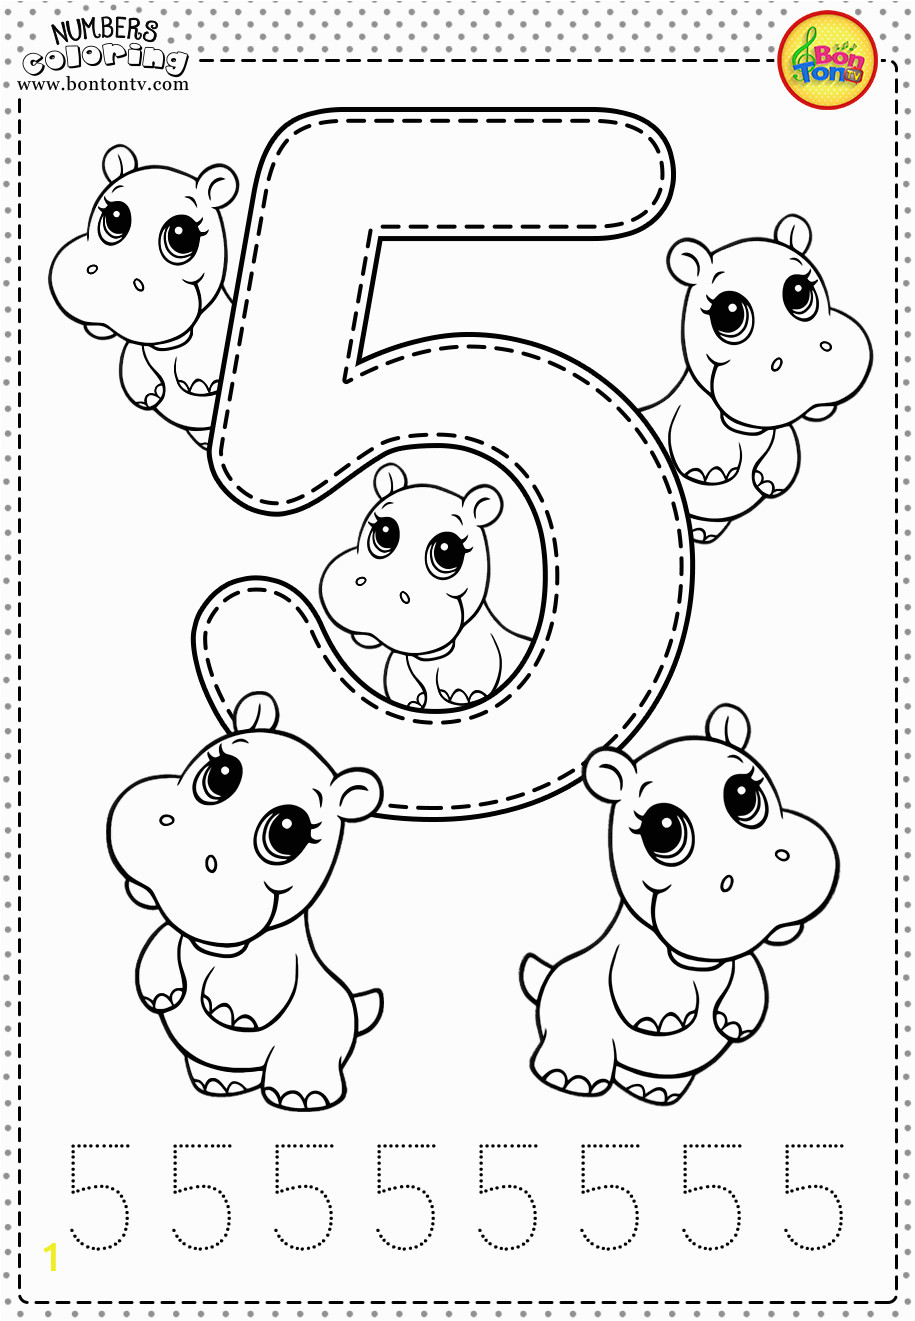 Alphabet Coloring for Grade 1 Number 5 Preschool Printables Free Worksheets and